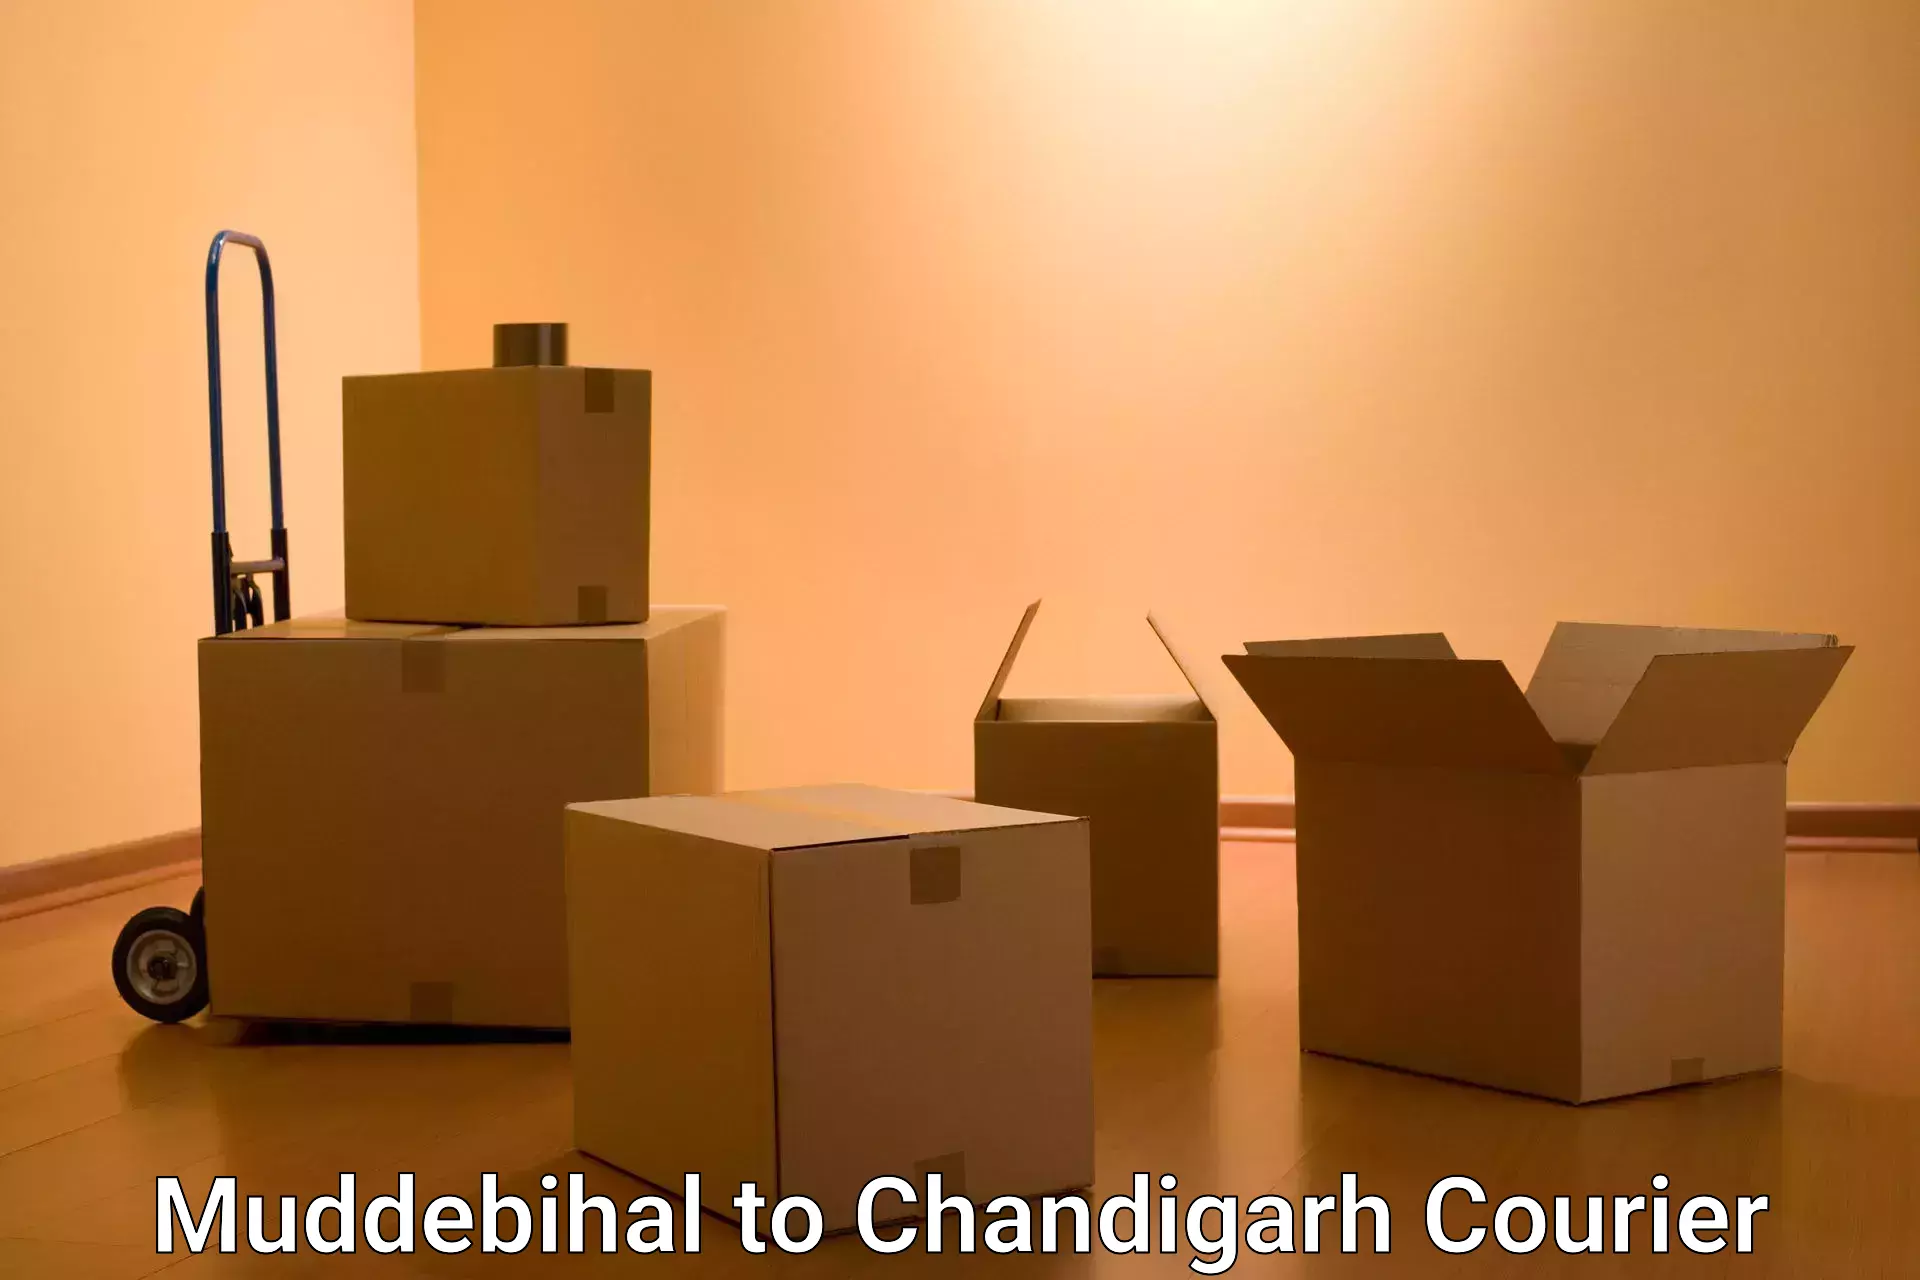 Courier rate comparison in Muddebihal to Chandigarh